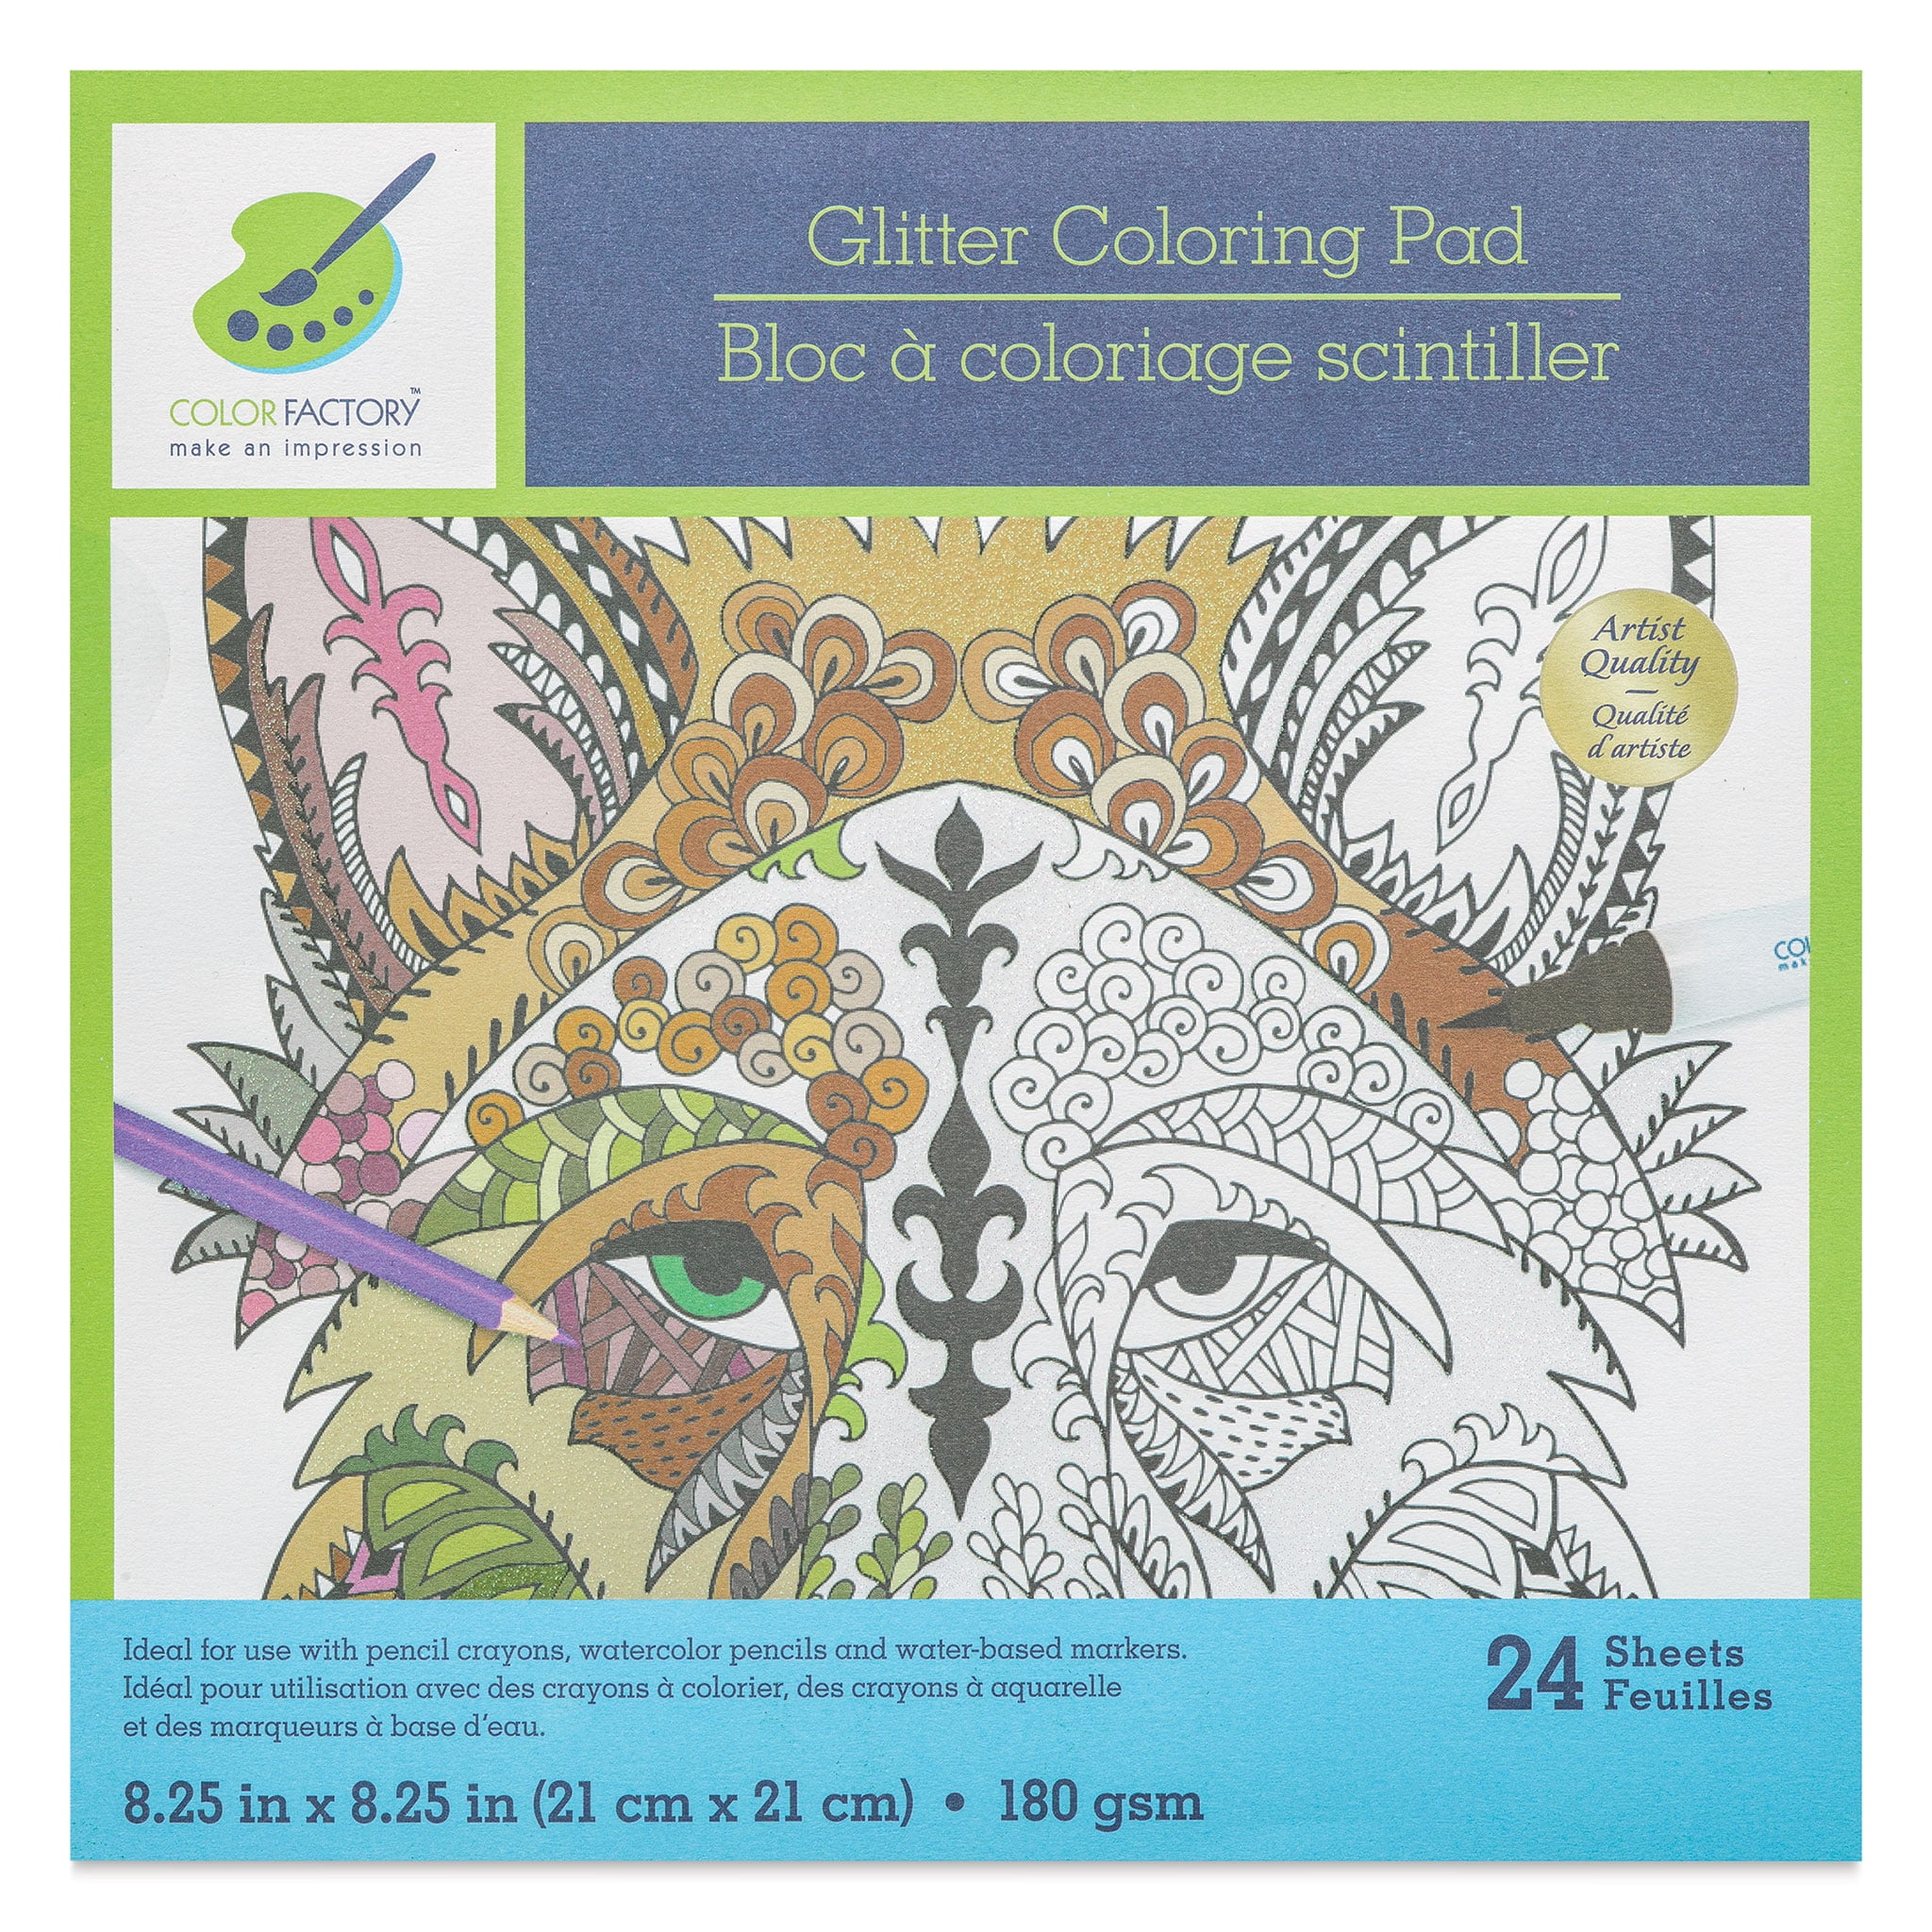 Color Factory Glitter Coloring Pad - Savage, 24 Sheets